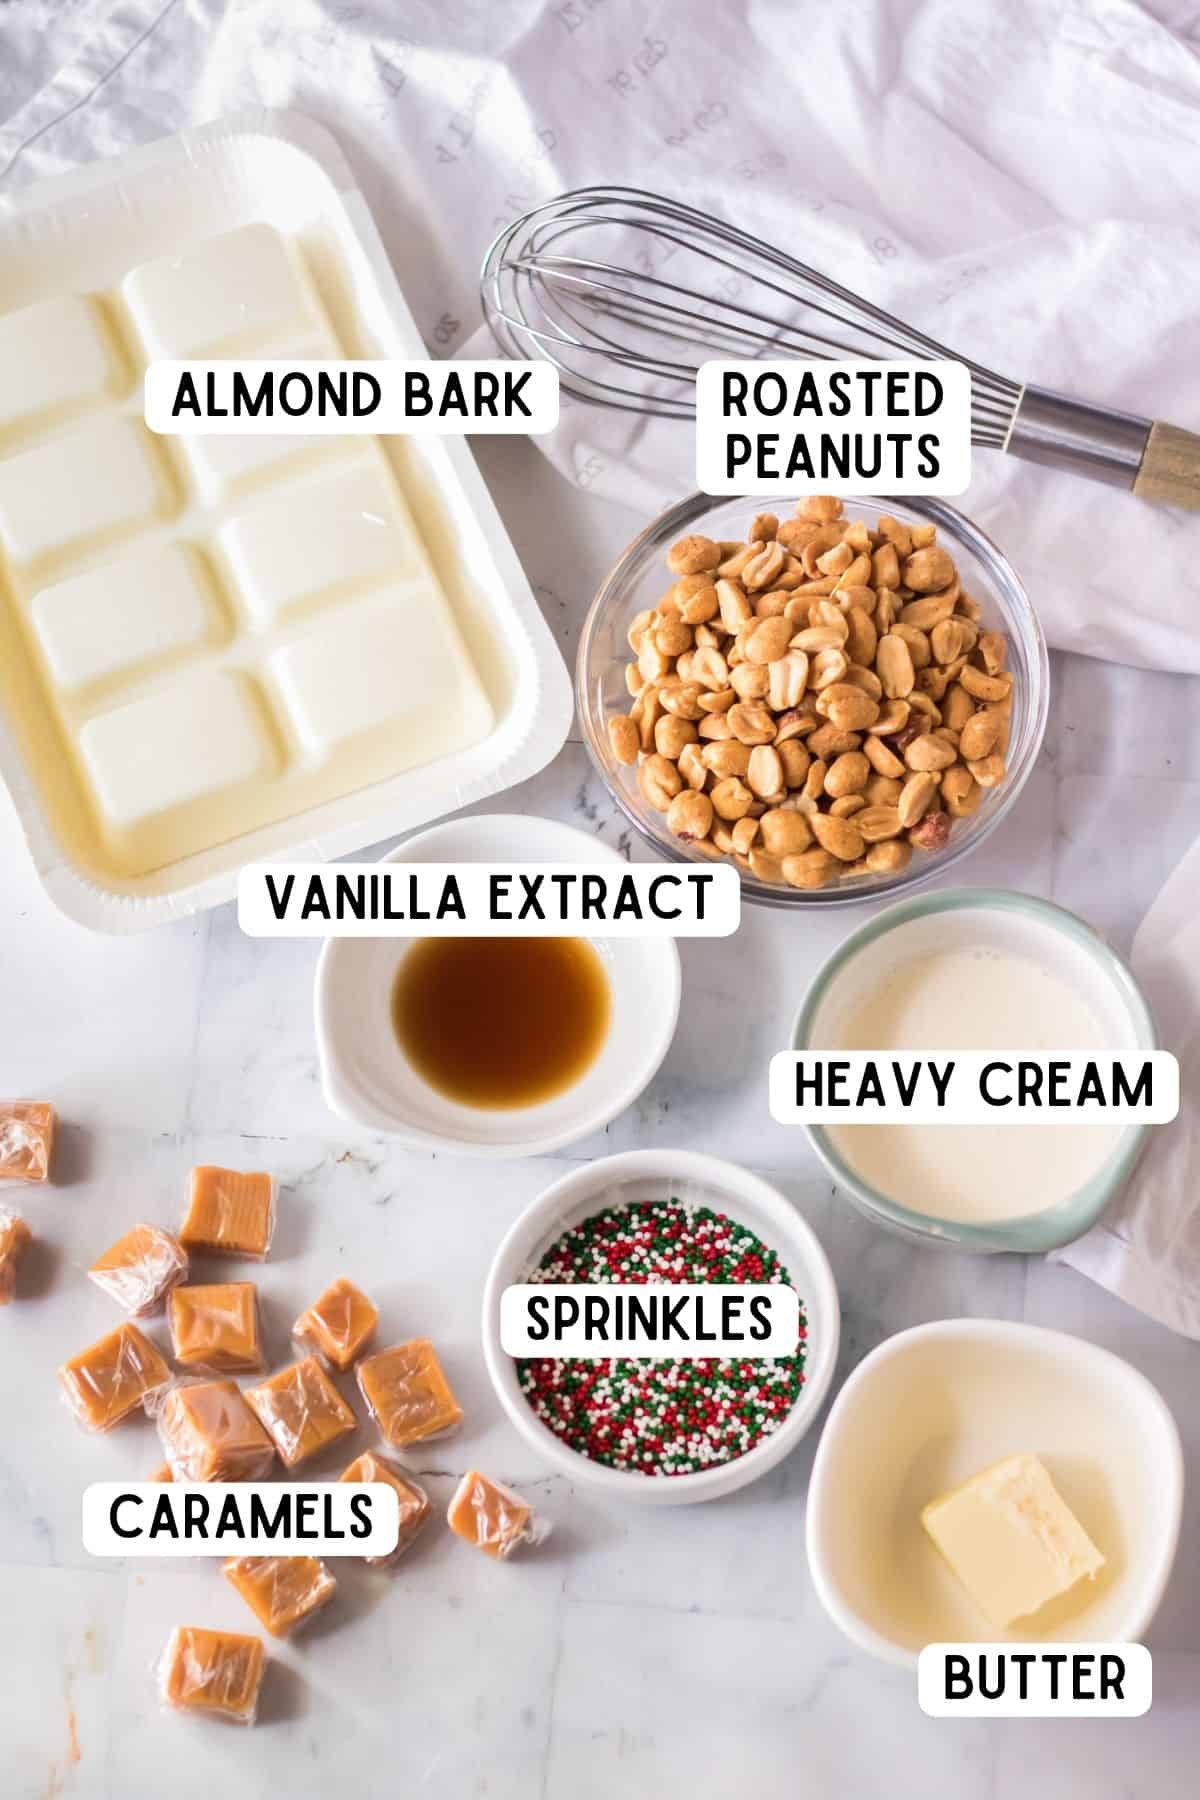 Ingredients for Polar Bear Paws candies.